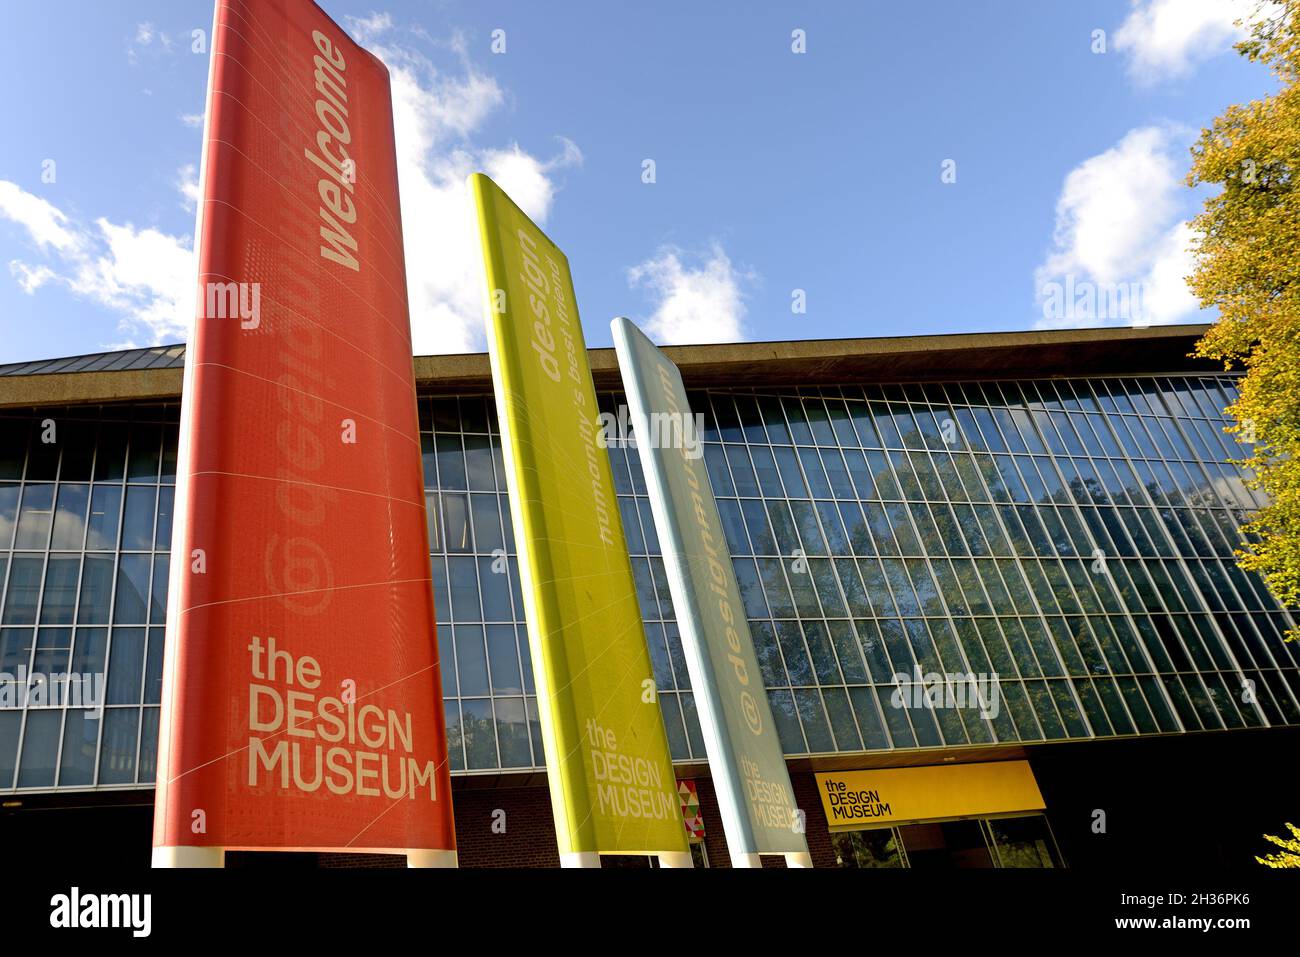 London, England, UK. The Design Museum, Kensington High St. (Founded 1989 by Terence Conran and Stephen Bayley) Stock Photo